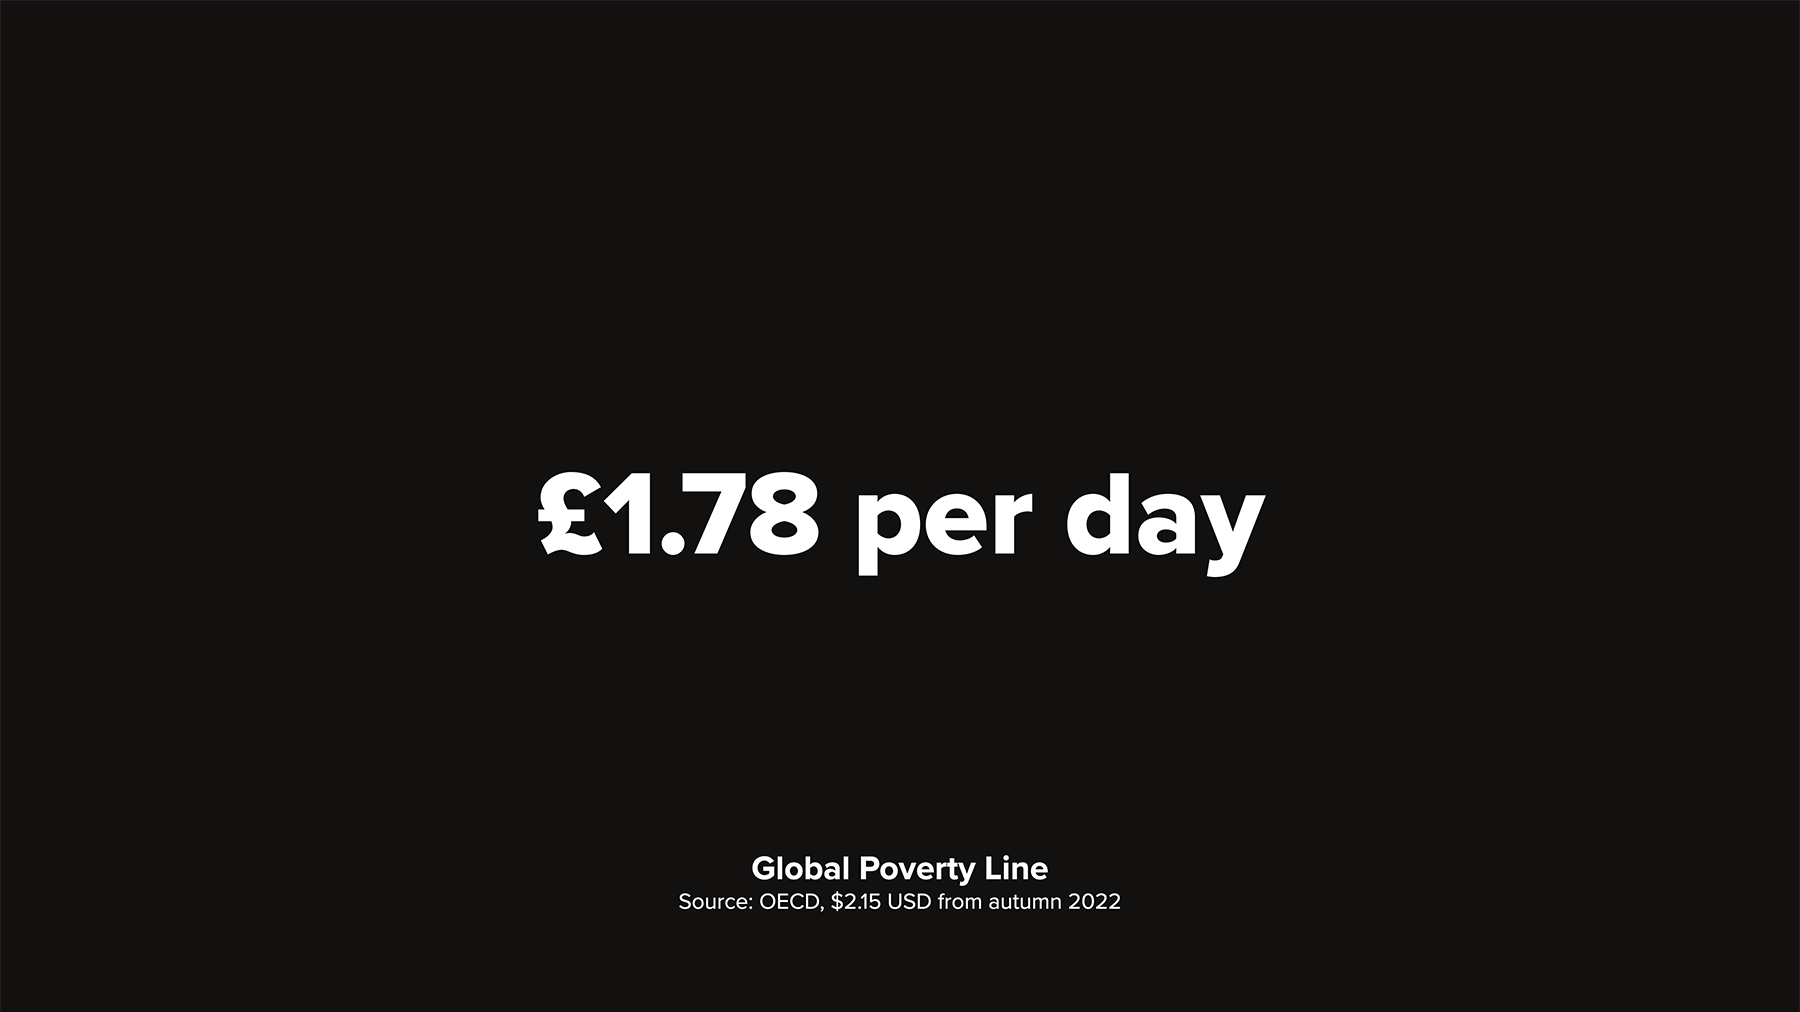  The global poverty line is being revised to $2.15 USD per day from autumn 2022, that's about £1.80 per day.